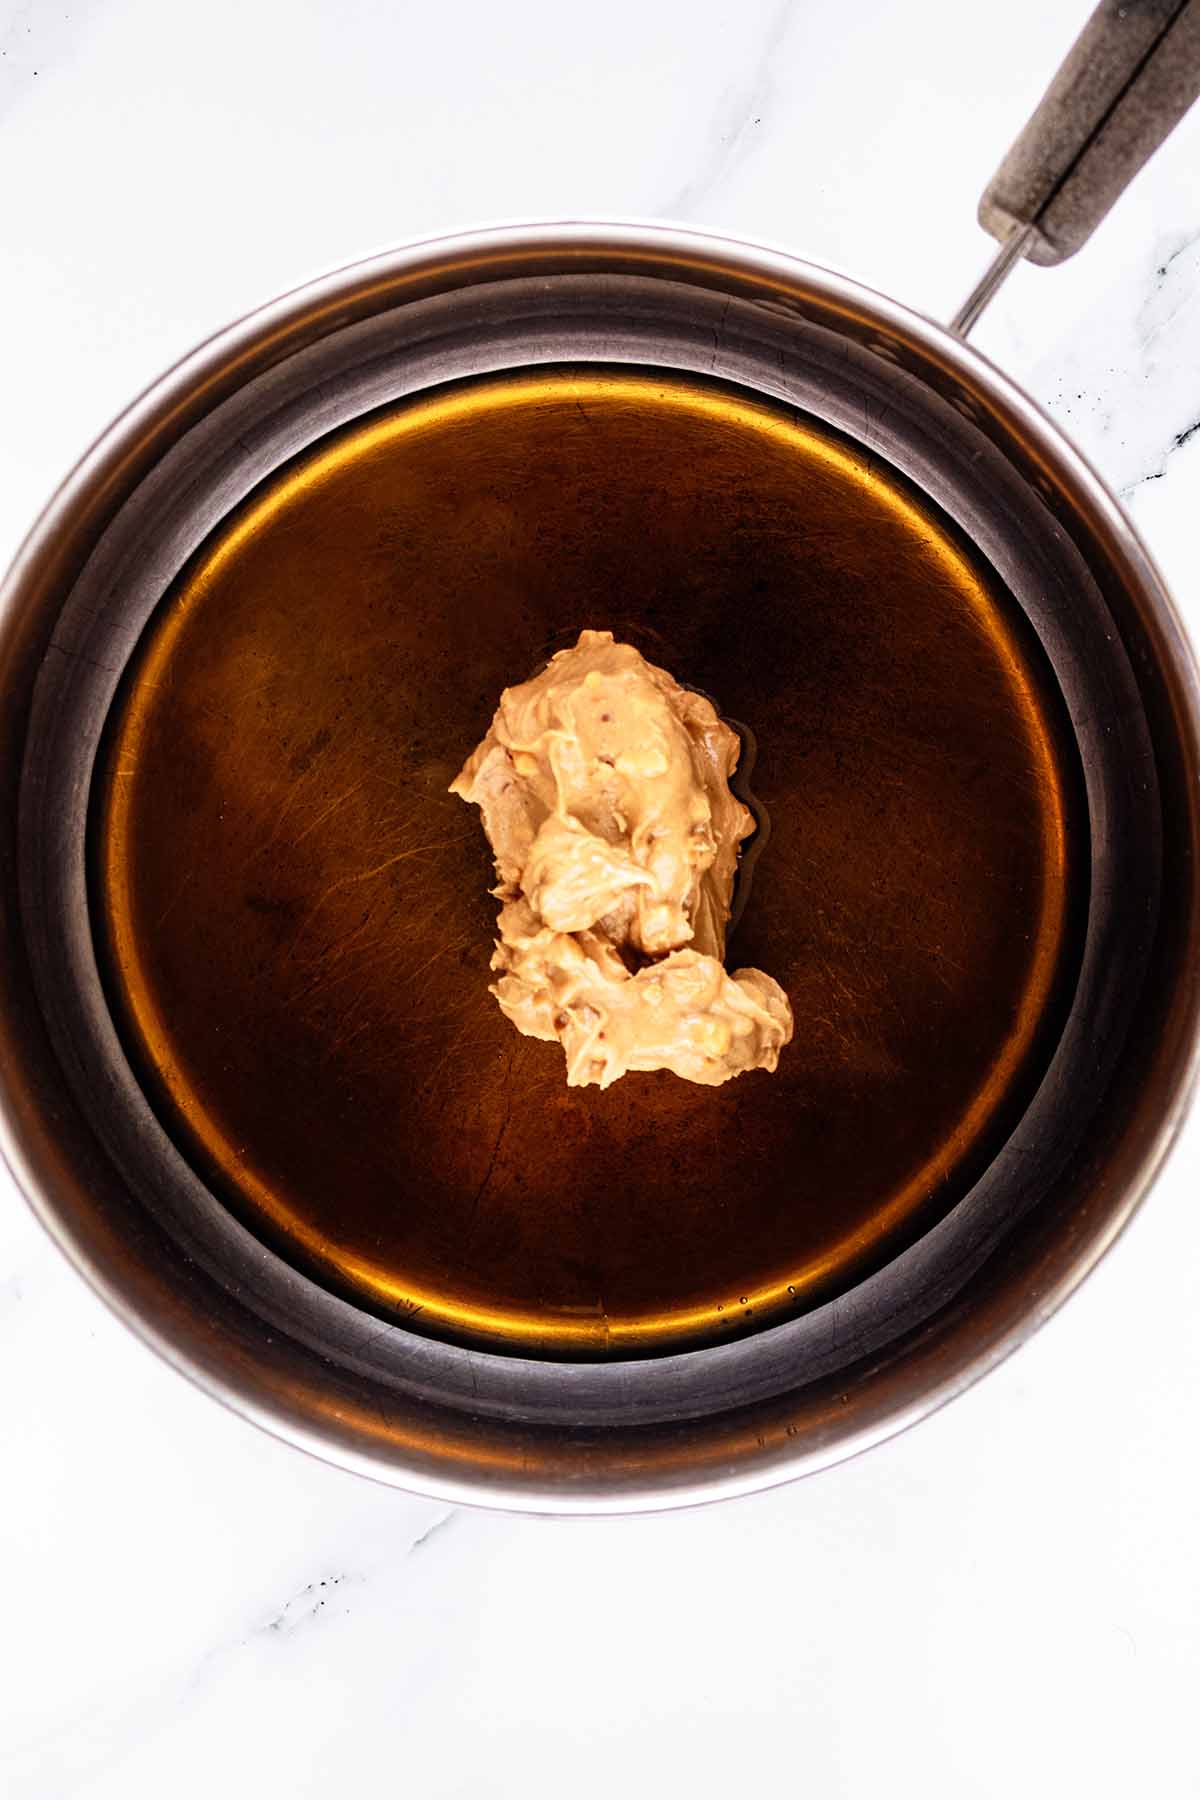 Overhead view of agave syrup and peanut butter in a saucepan